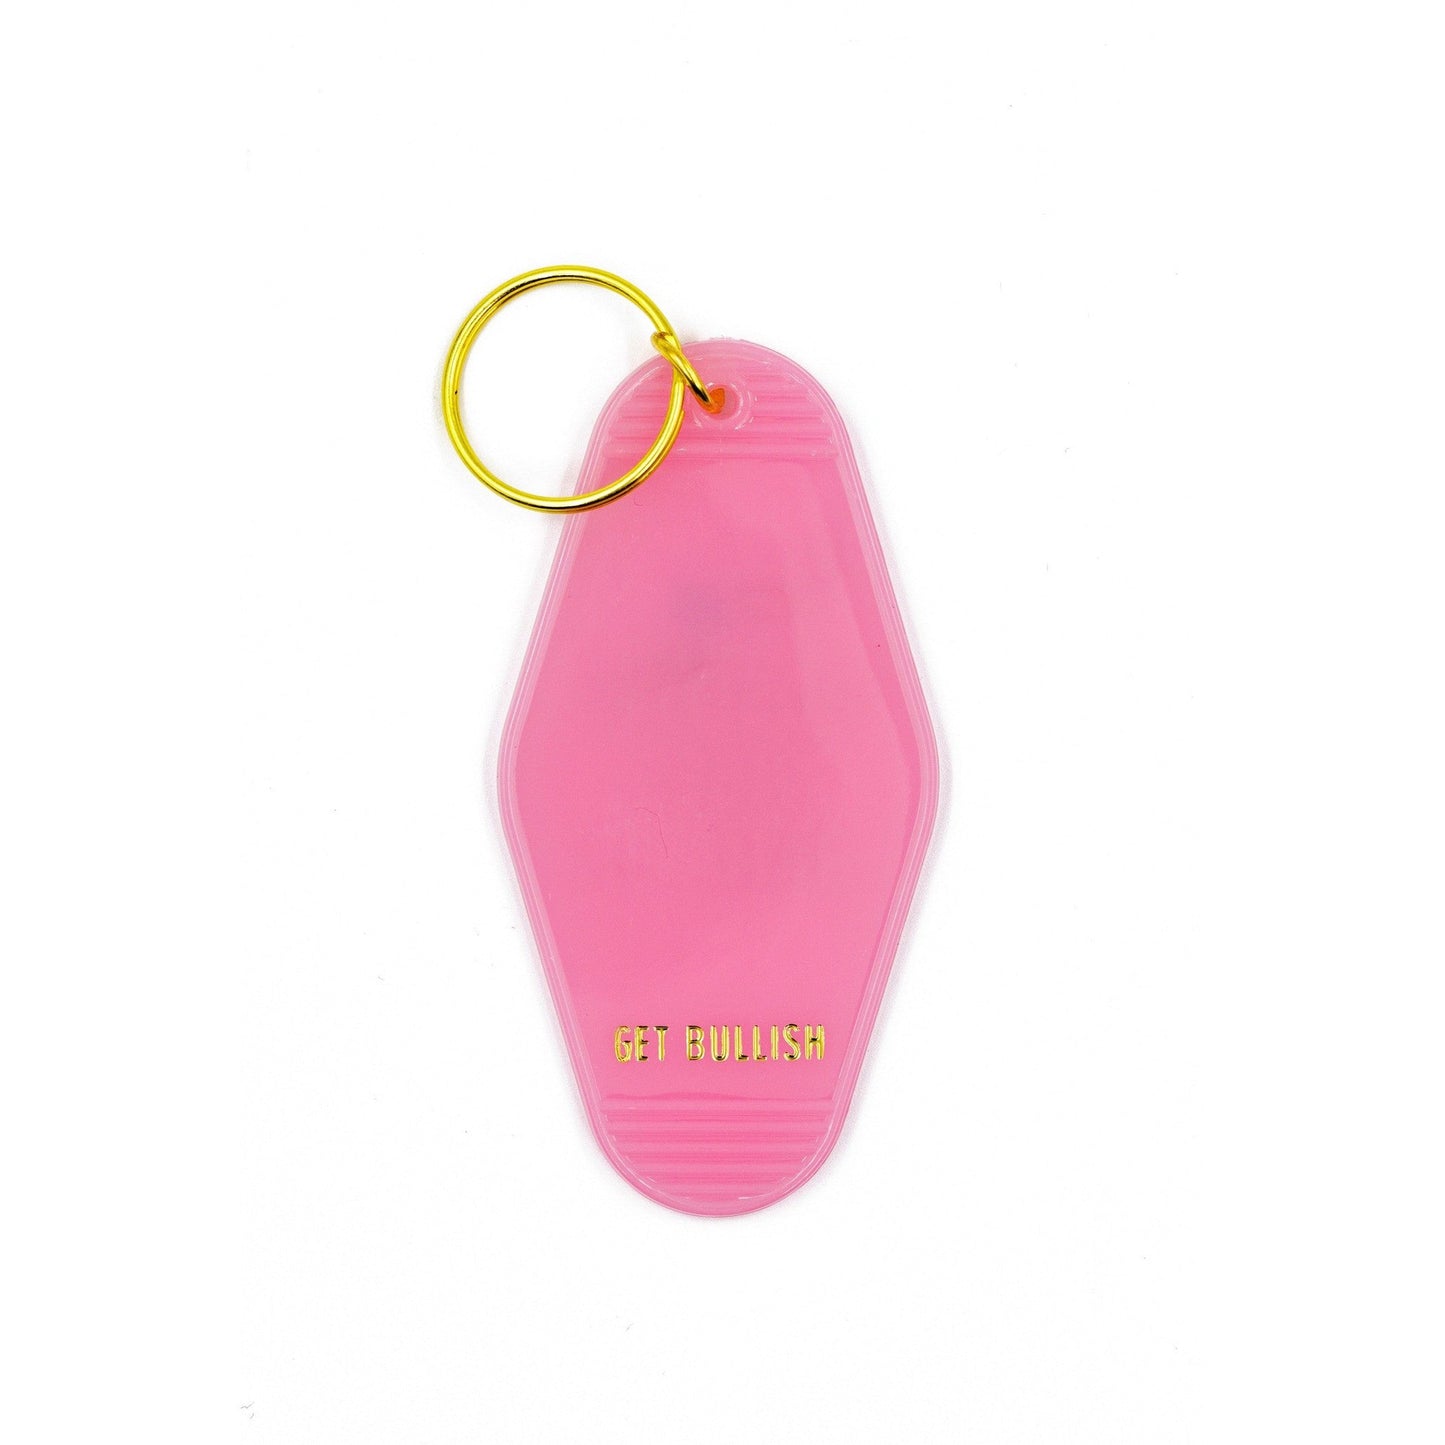 Positive Vibes Haha JK Motel Keychain in Pink